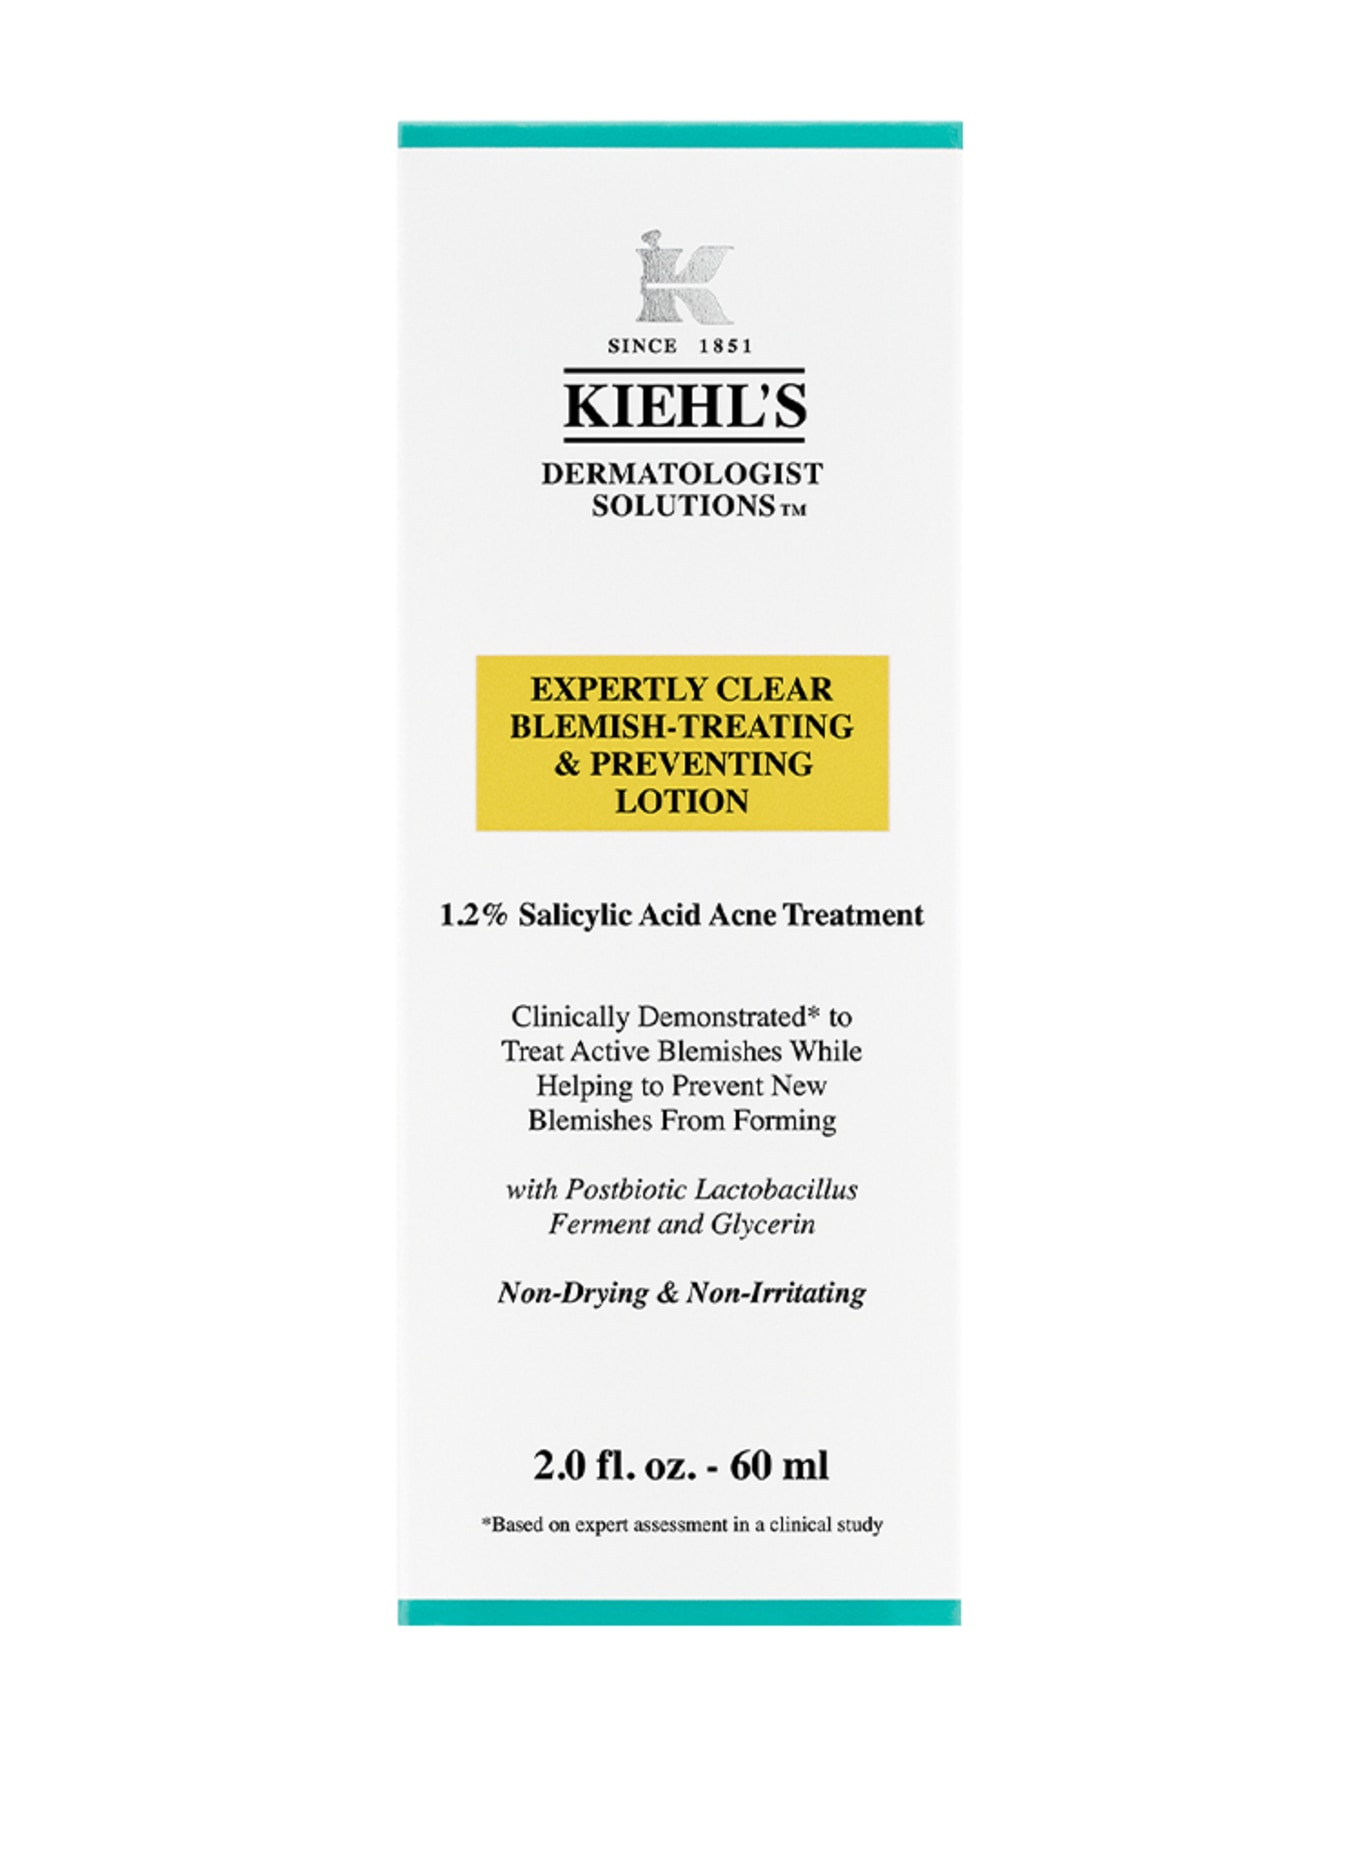 Kiehl's EXPERTLY CLEAR BLEMISH TREATING & PREVENTING LOTION (Obrazek 2)